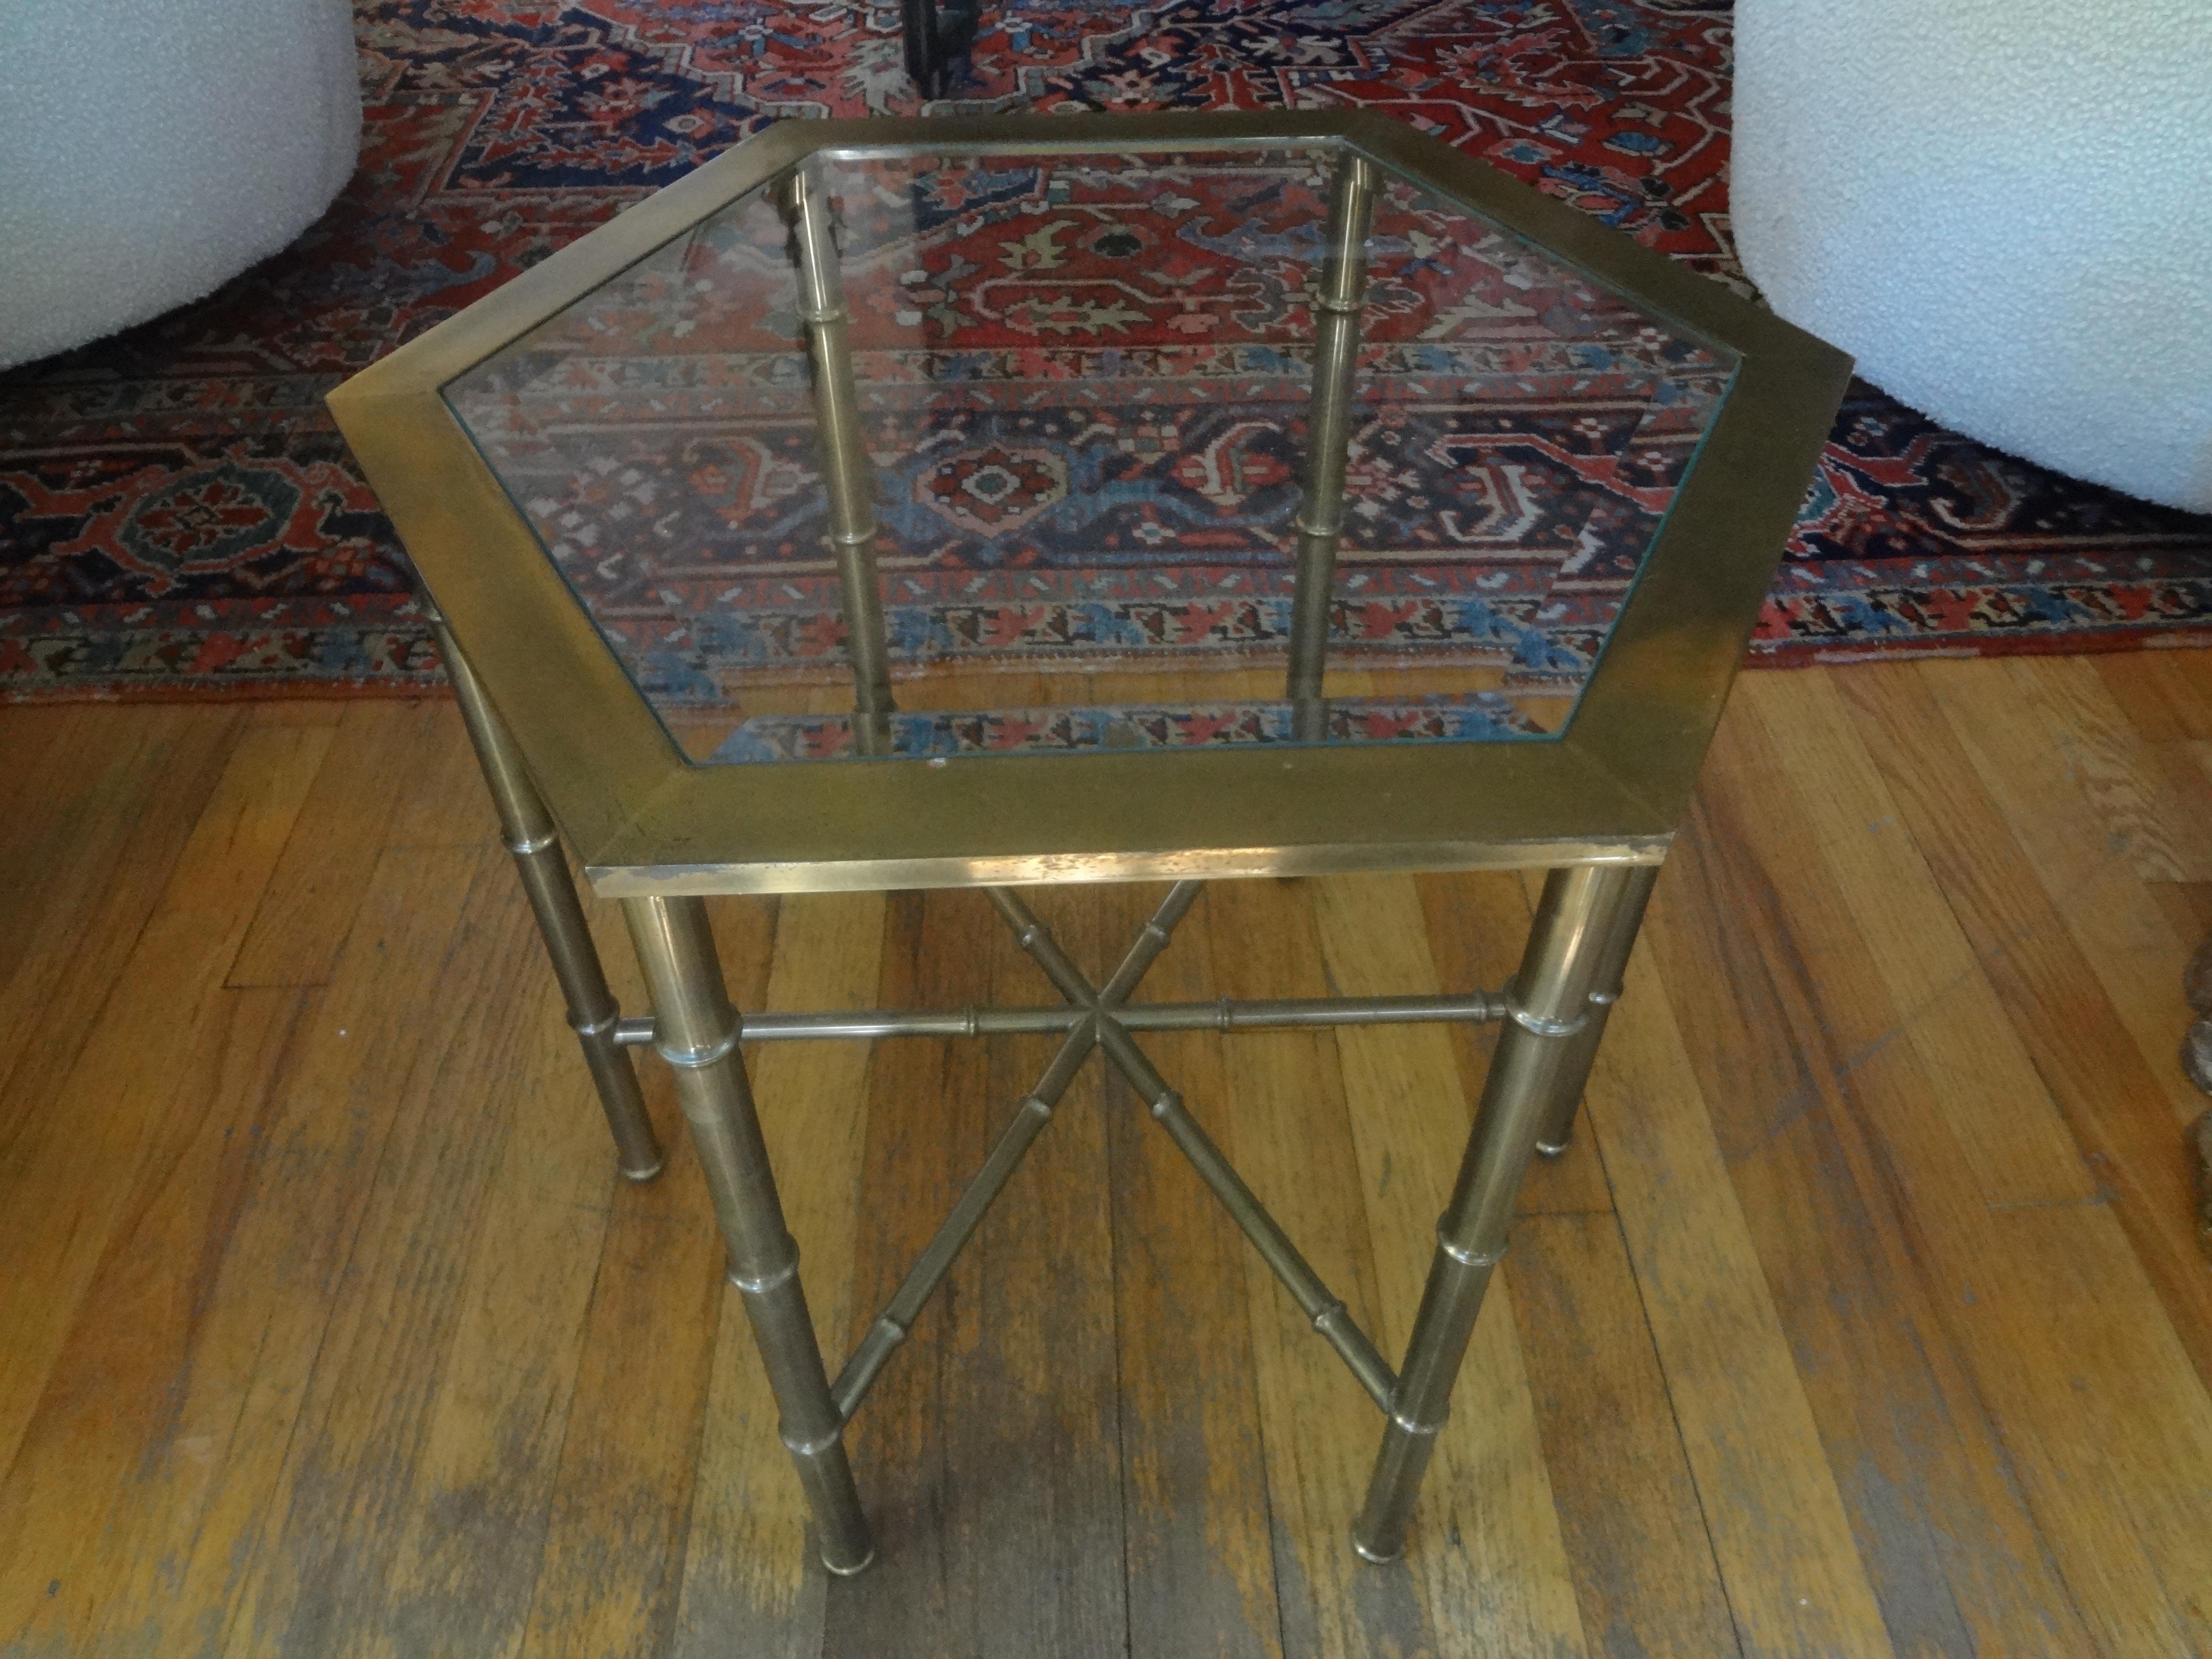 Hollywood Regency brass hexagonal table with beveled glass top. This versatile midcentury brass table can be used as a side table, drink table, end table, low table, cigarette table or gueridon. Beautiful aged patina!